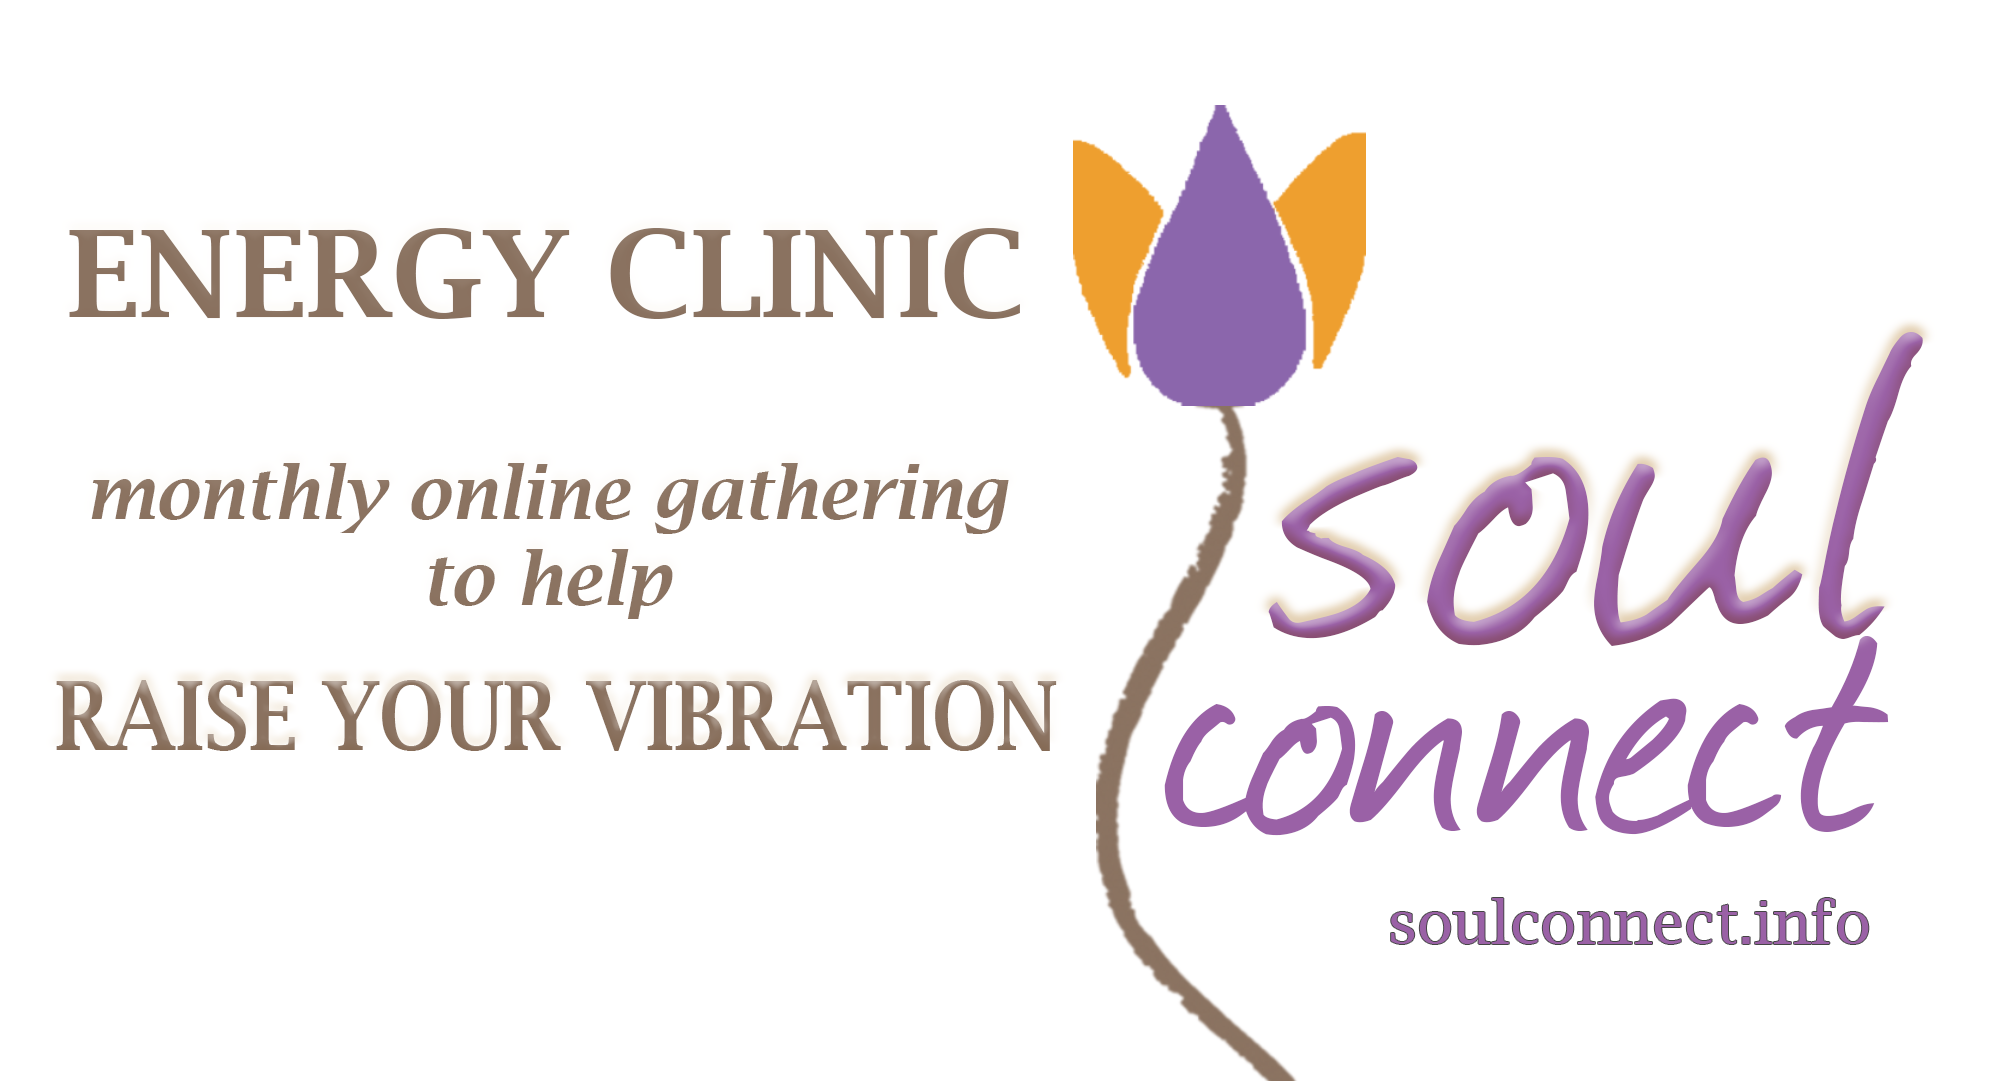 Announcing: Final Energy Clinic